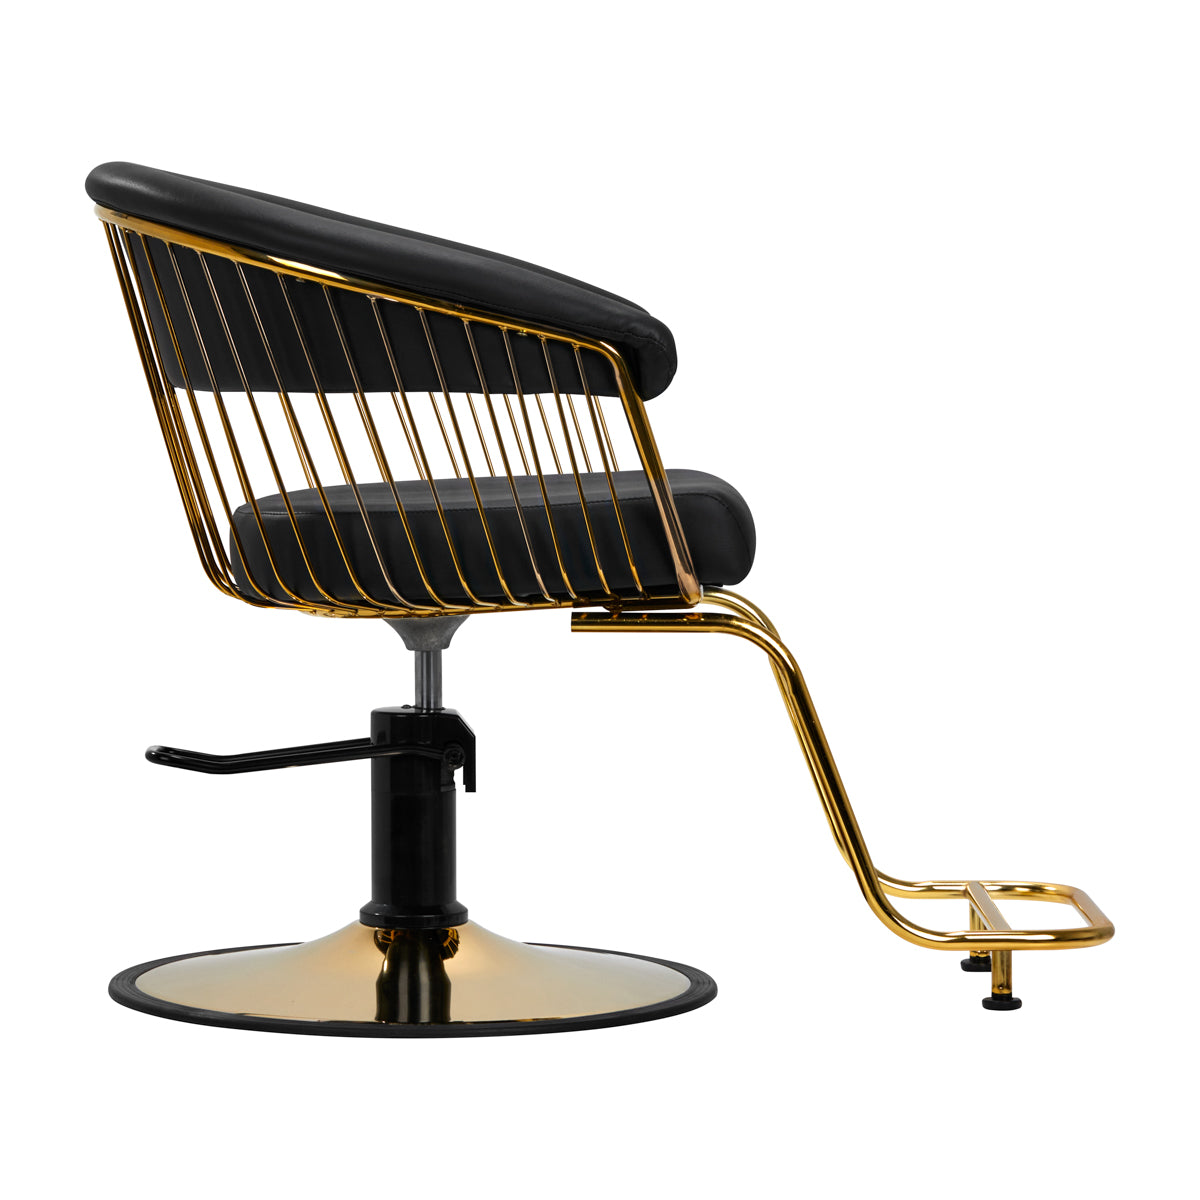 Gabbiano hairdressing chair Lille-M gold black